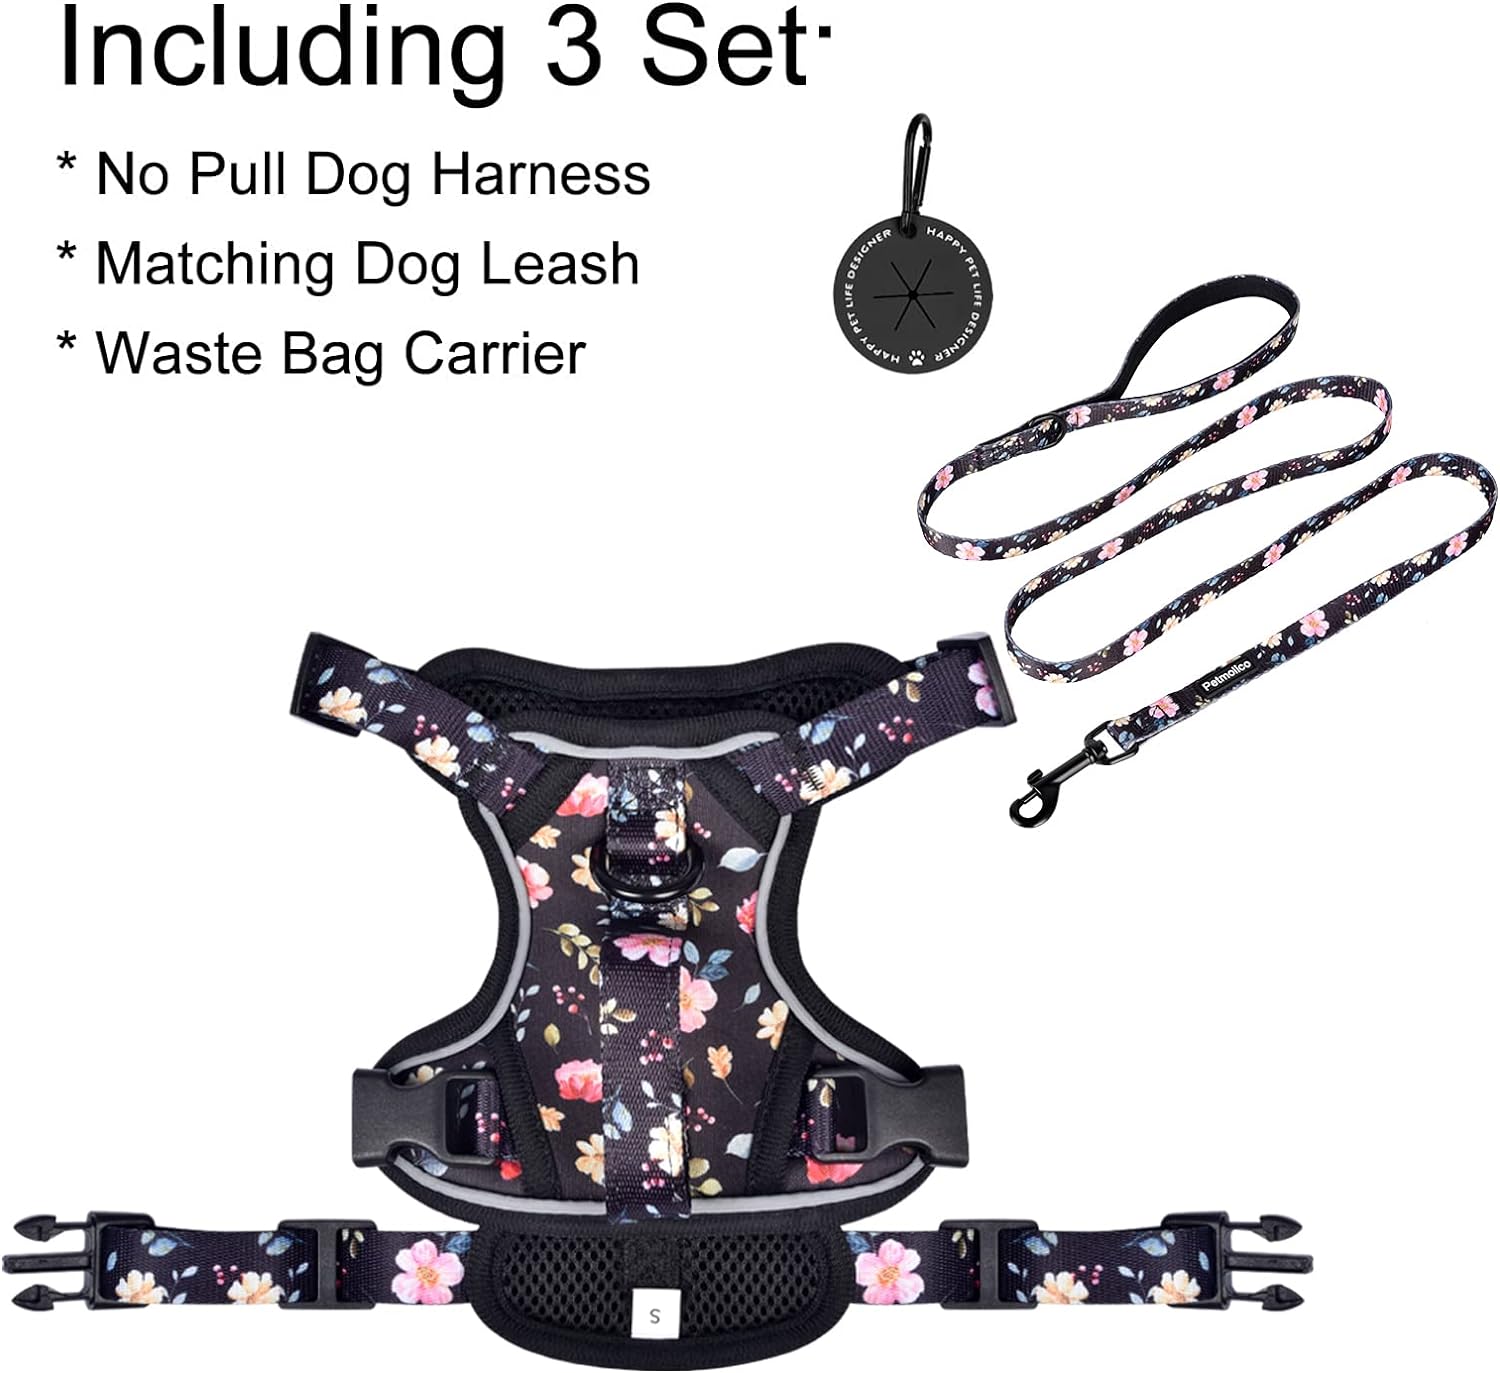 Petmolico Dog Harness for XS Dogs No Pull, Cute Dog Harness with Two Leash Clips and Soft Handle, Reflective Easy Walk Dog Harness with Leash, Pink XS